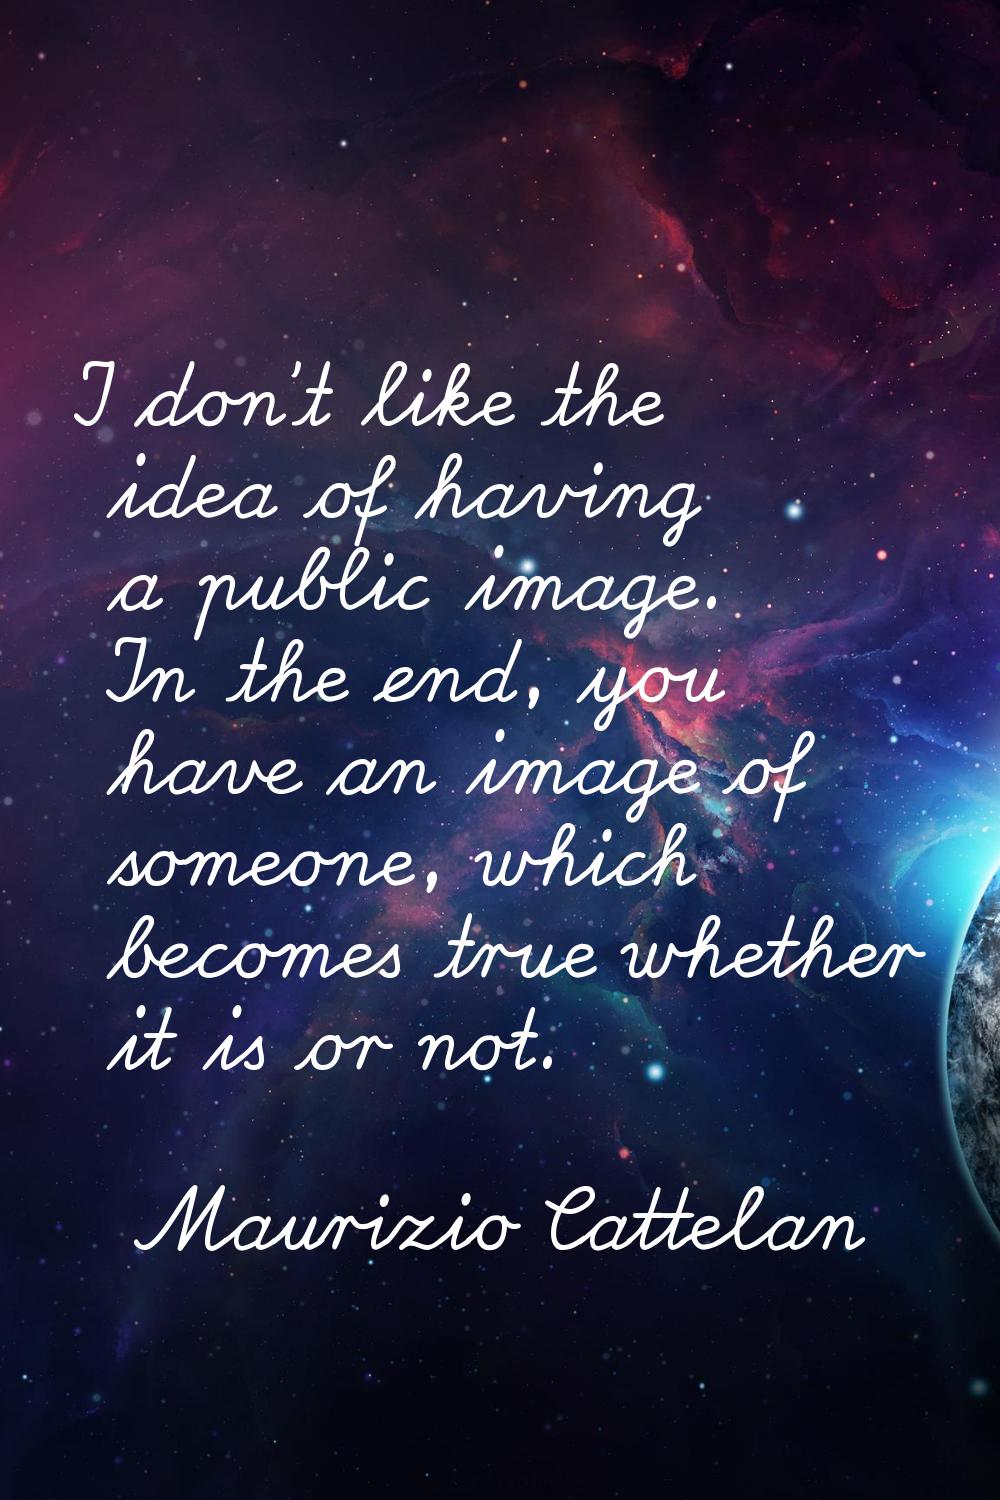 I don't like the idea of having a public image. In the end, you have an image of someone, which bec